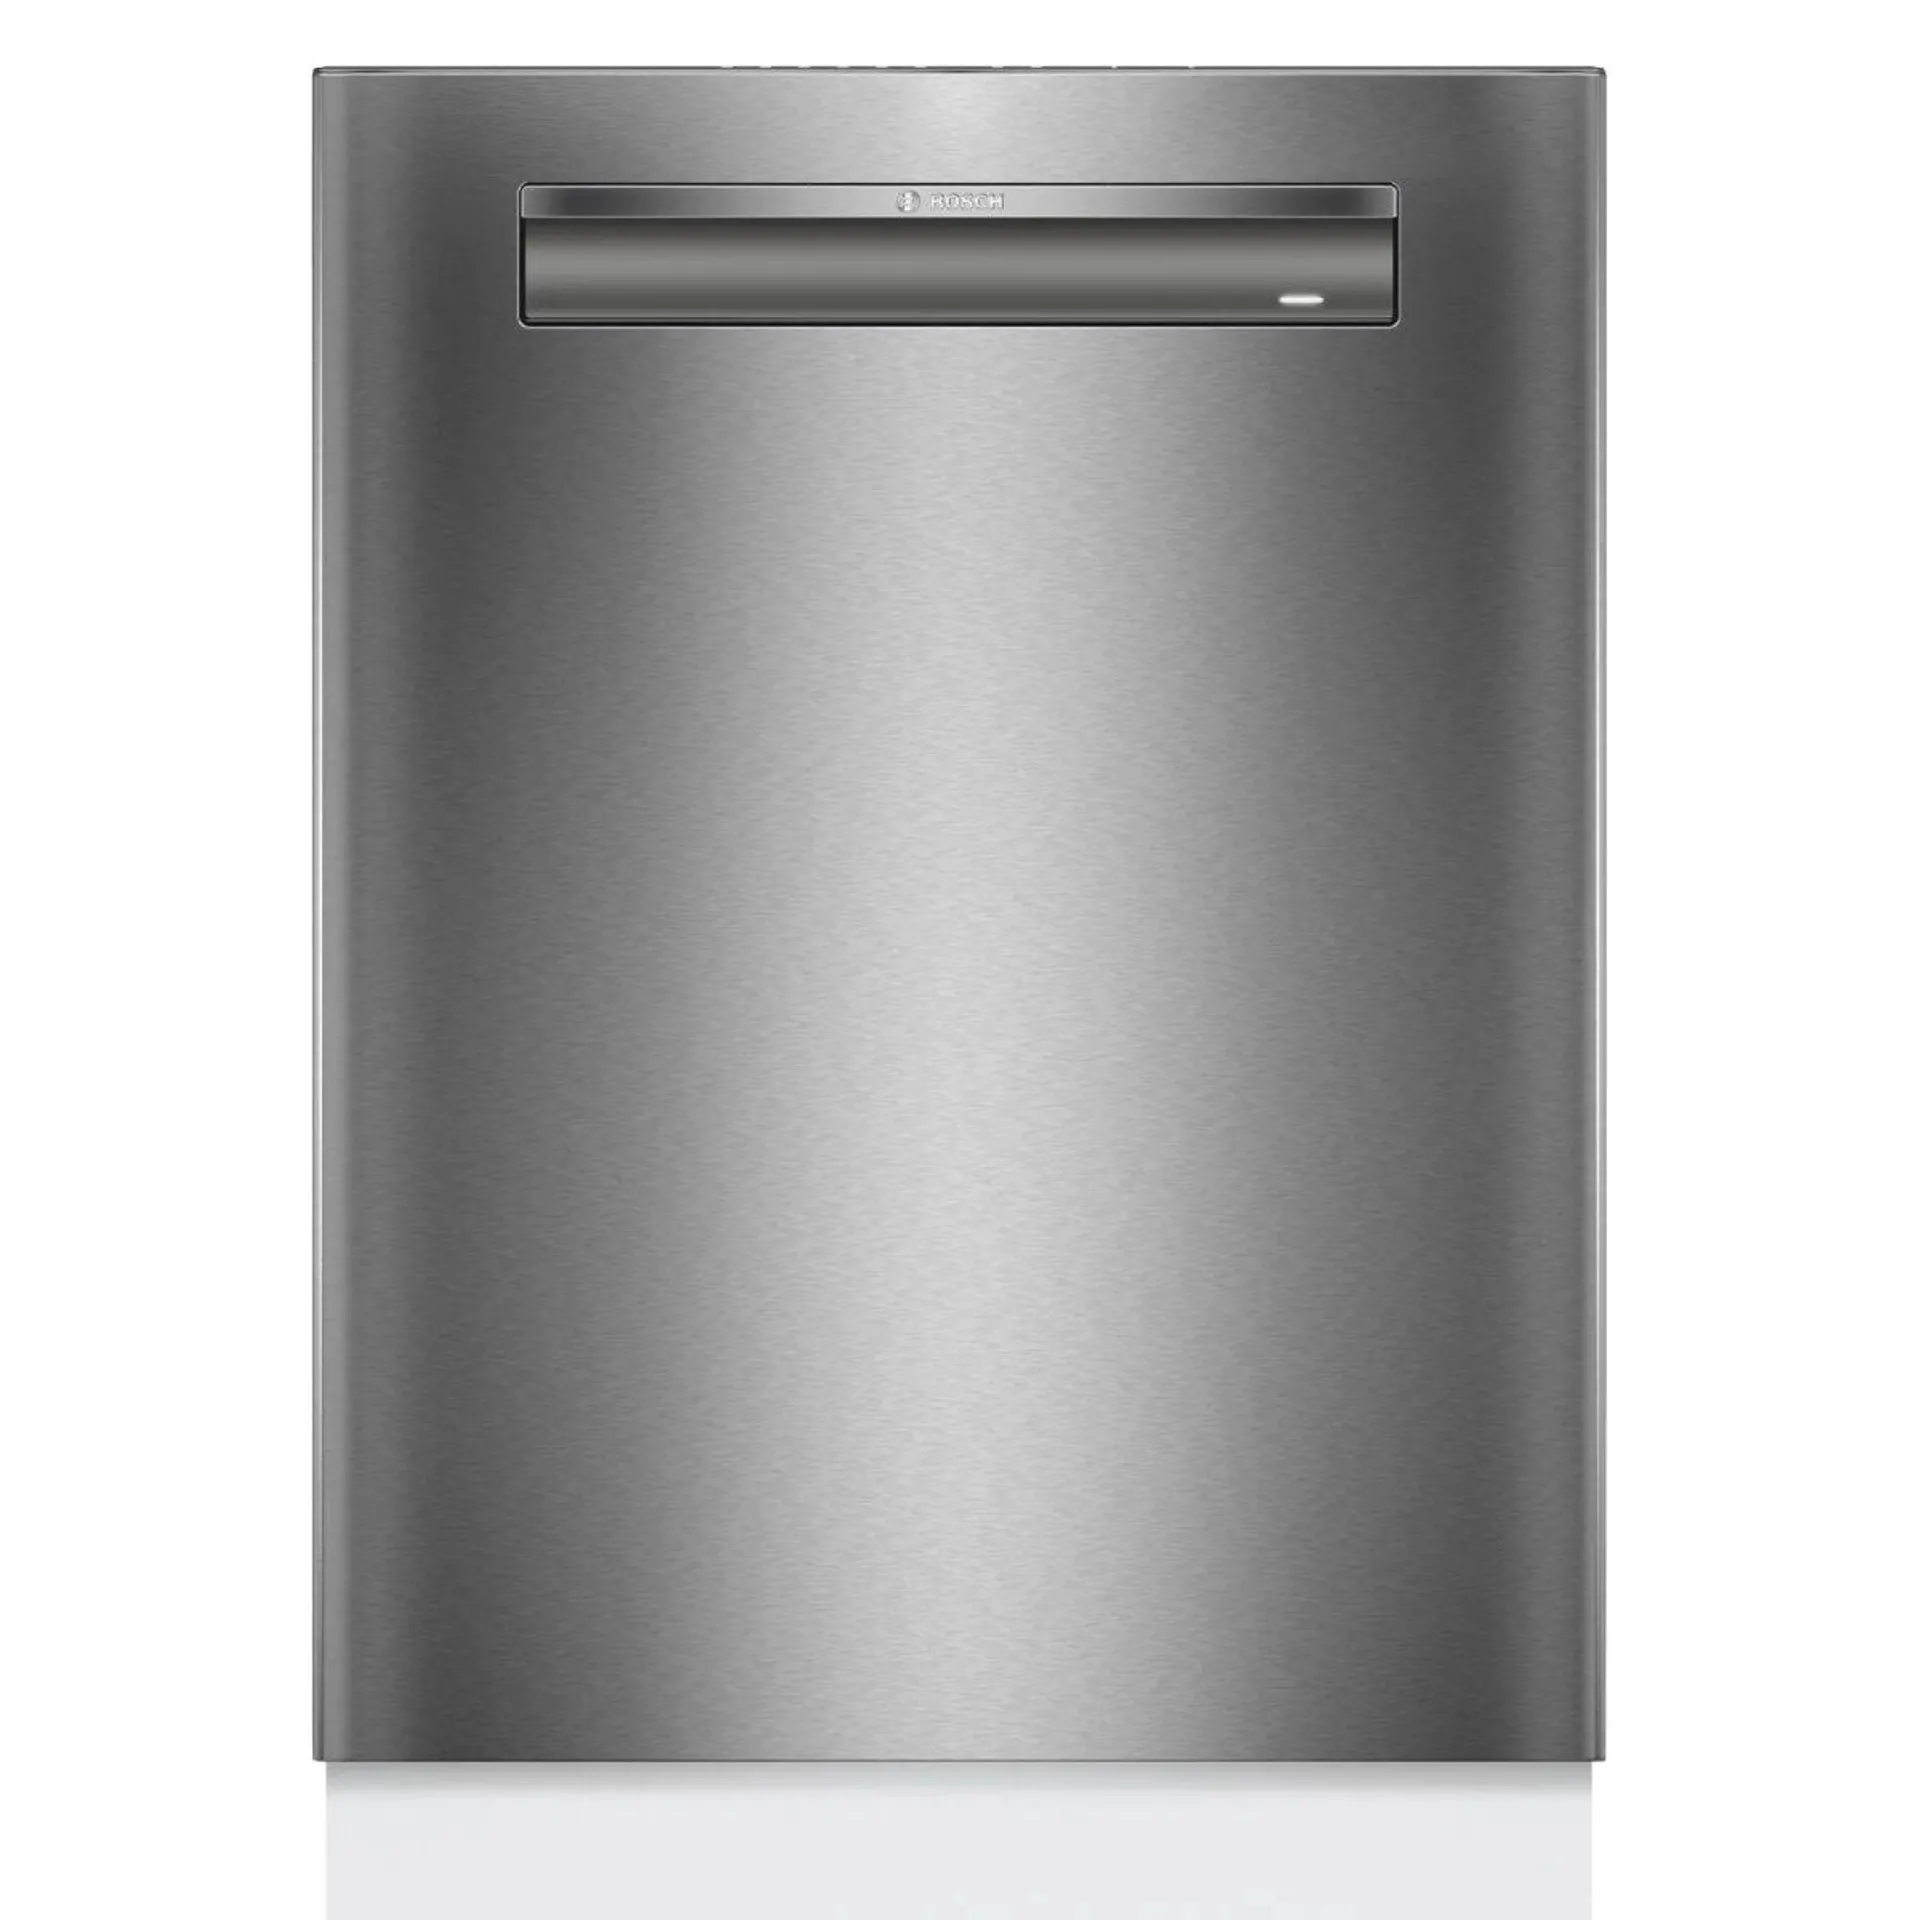 Bosch Series 6 Stainless Steel Built Uner Dishwasher with Home Connect SMP6HCS01A